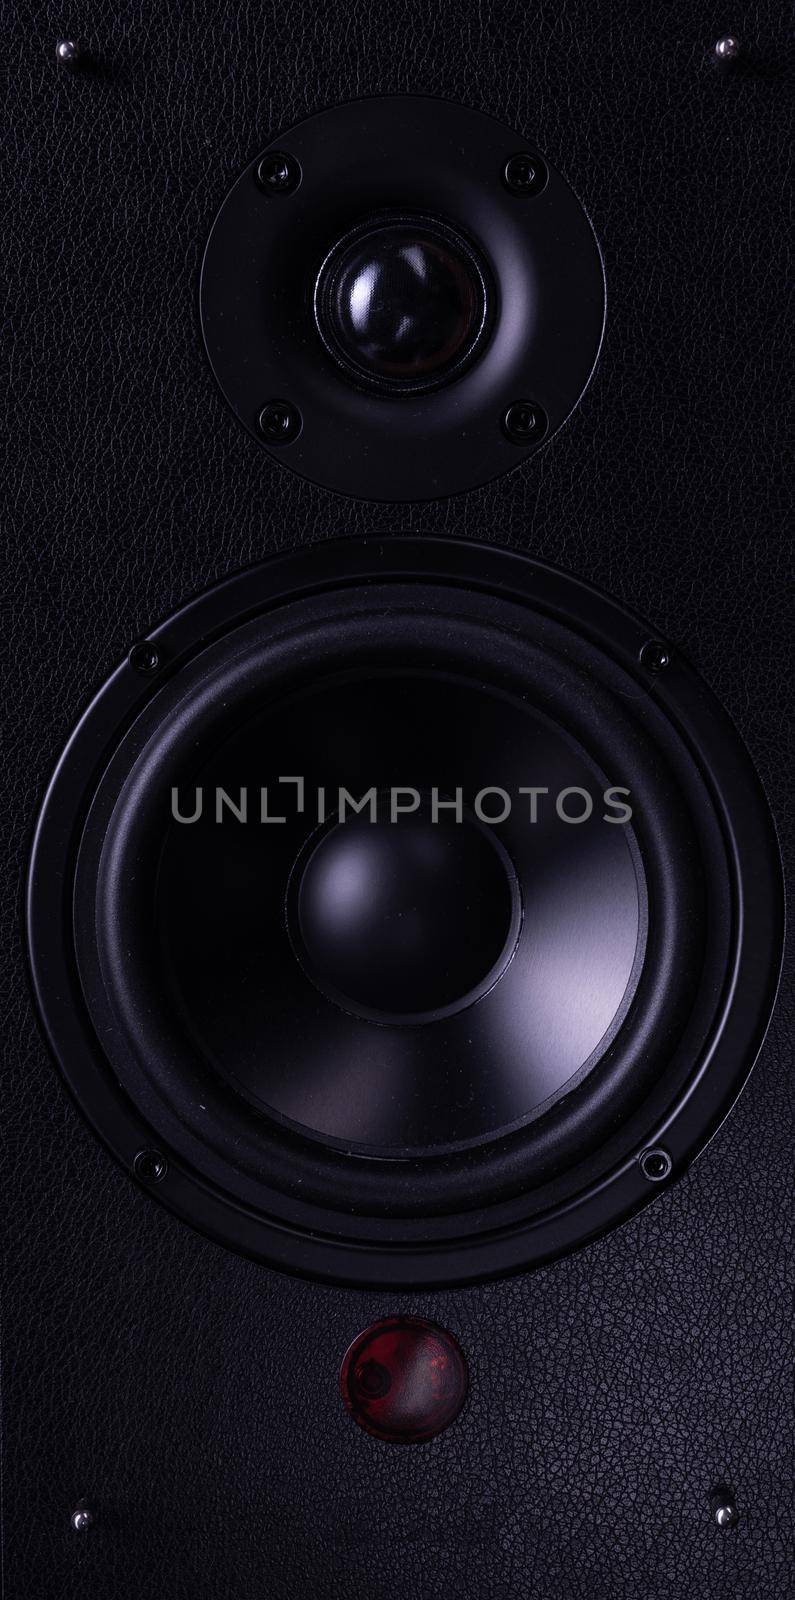 professional speaker for reproducing hi-fi music up-close with two speakers.